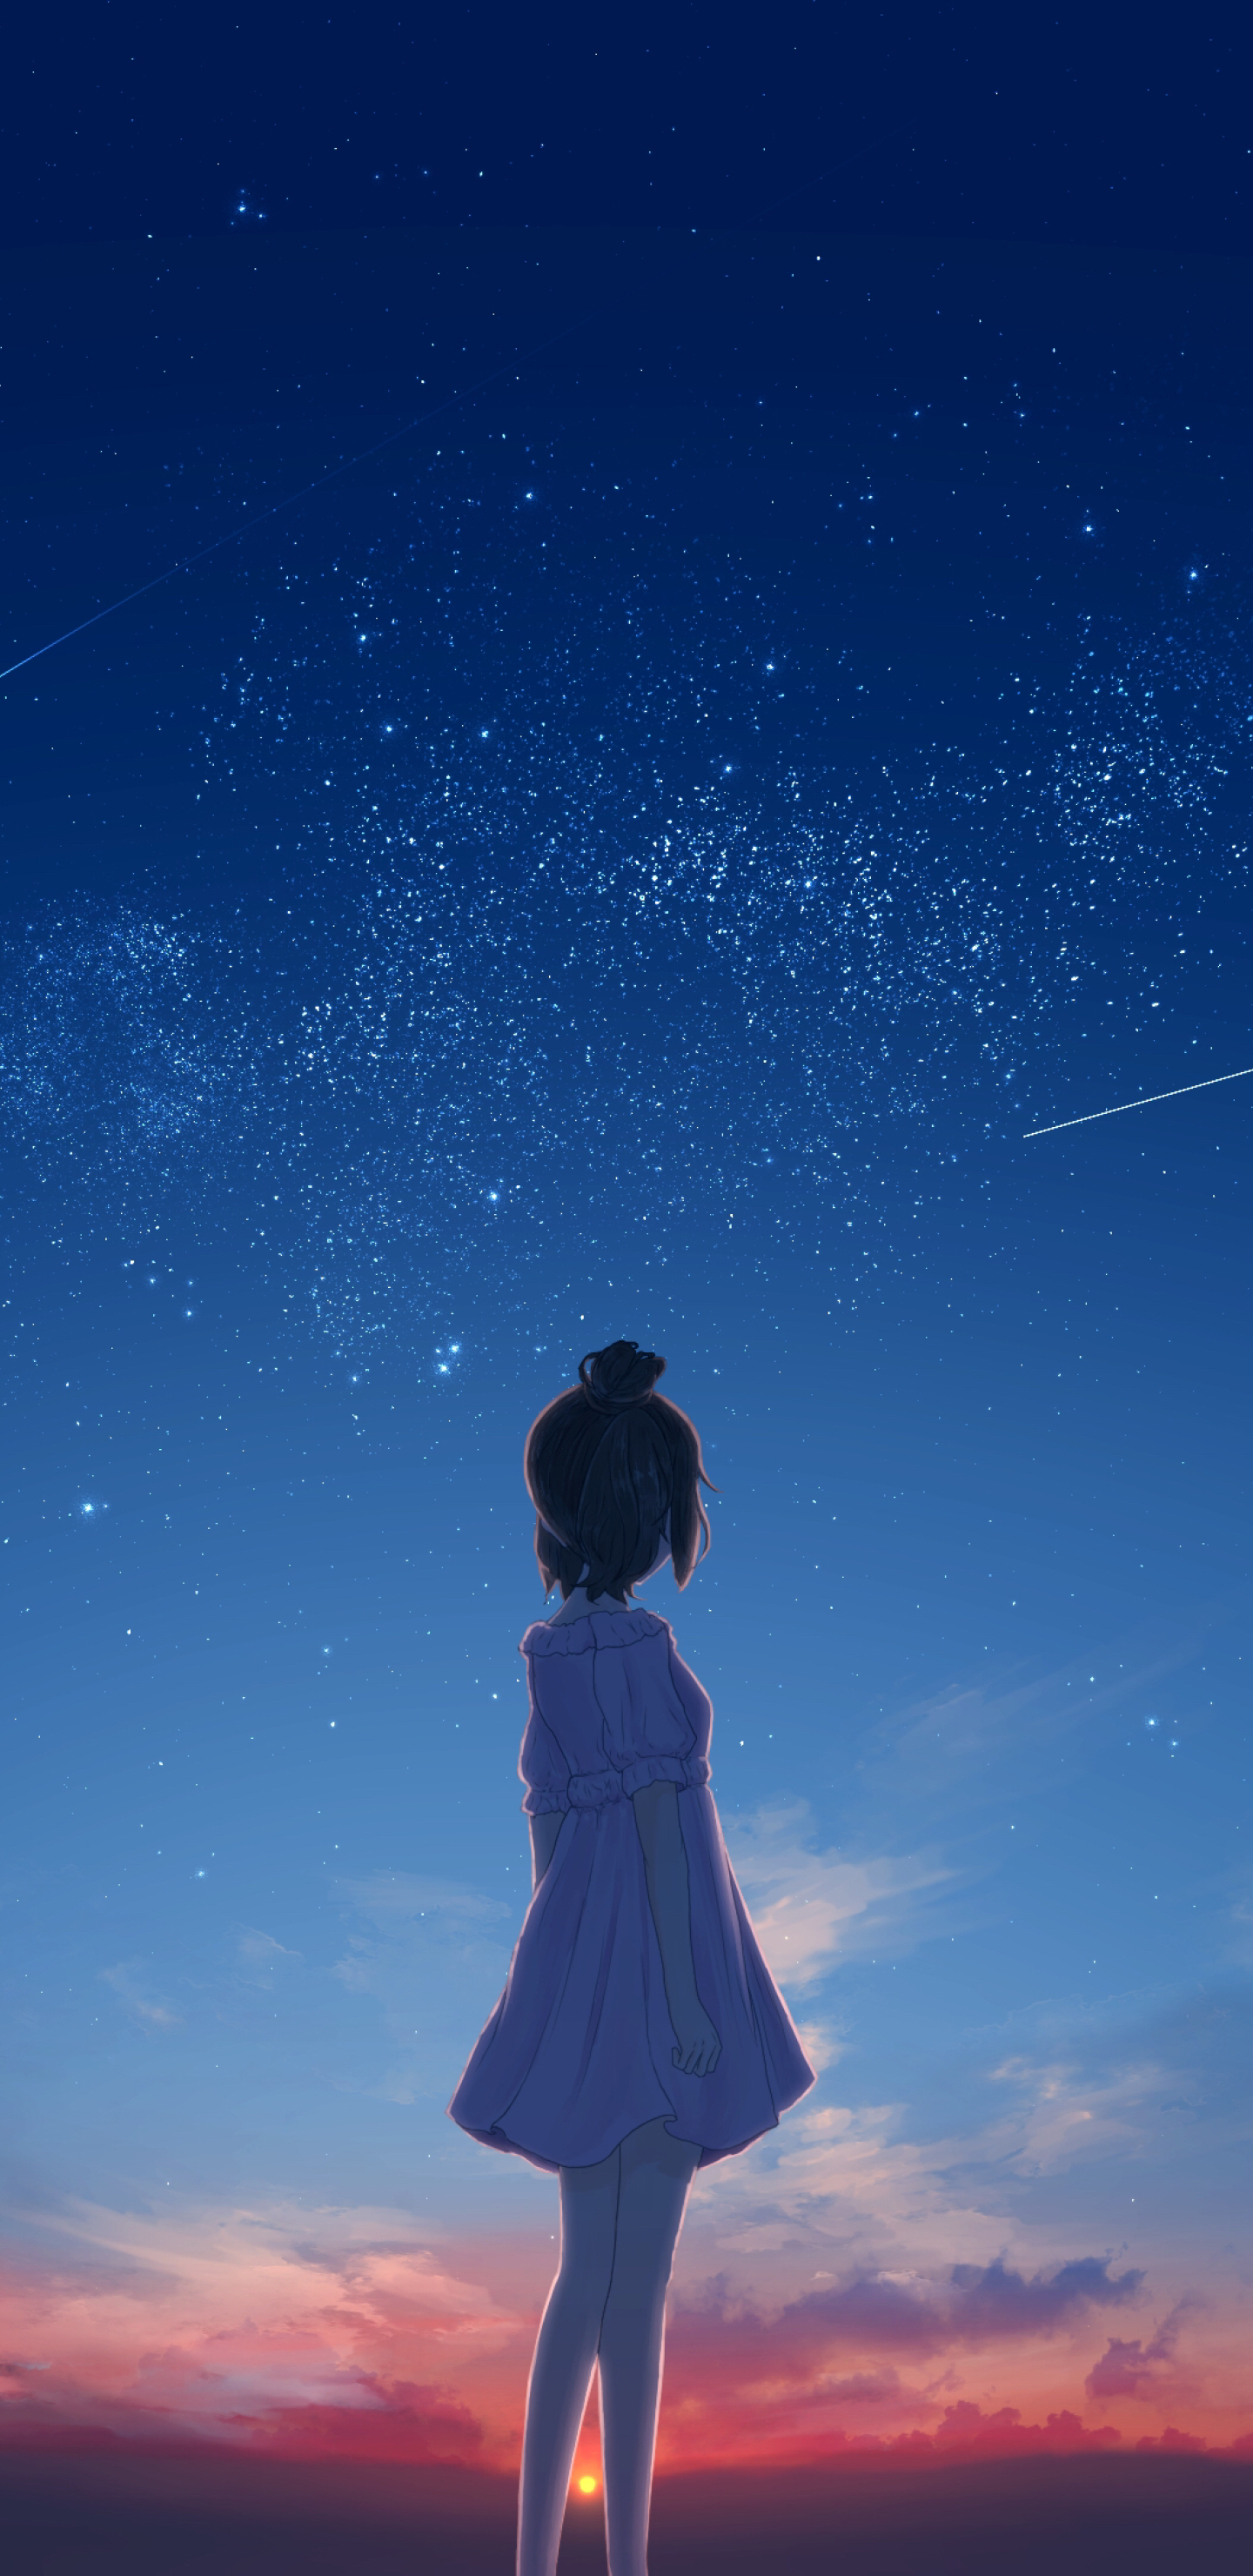 Wallpaper Anime Aesthetic Galaxy, Anime, Anime Art, Anime Style, Sleeve,  Background - Download Free Image